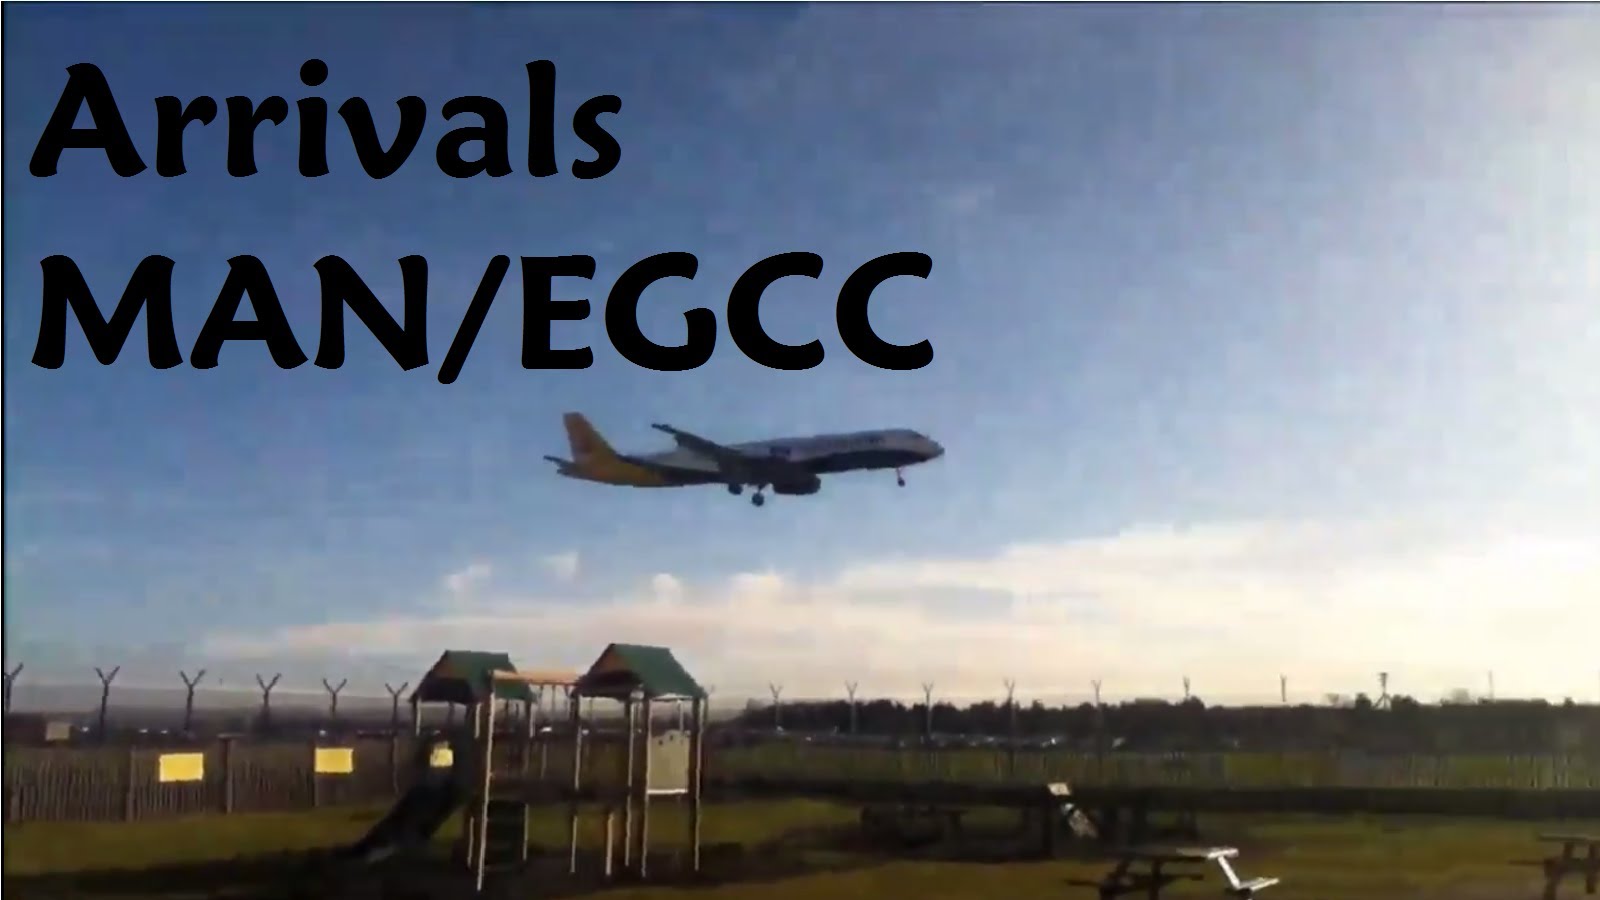 HD | Arrivals at Manchester Airport / Runway 23R / 21/12/13